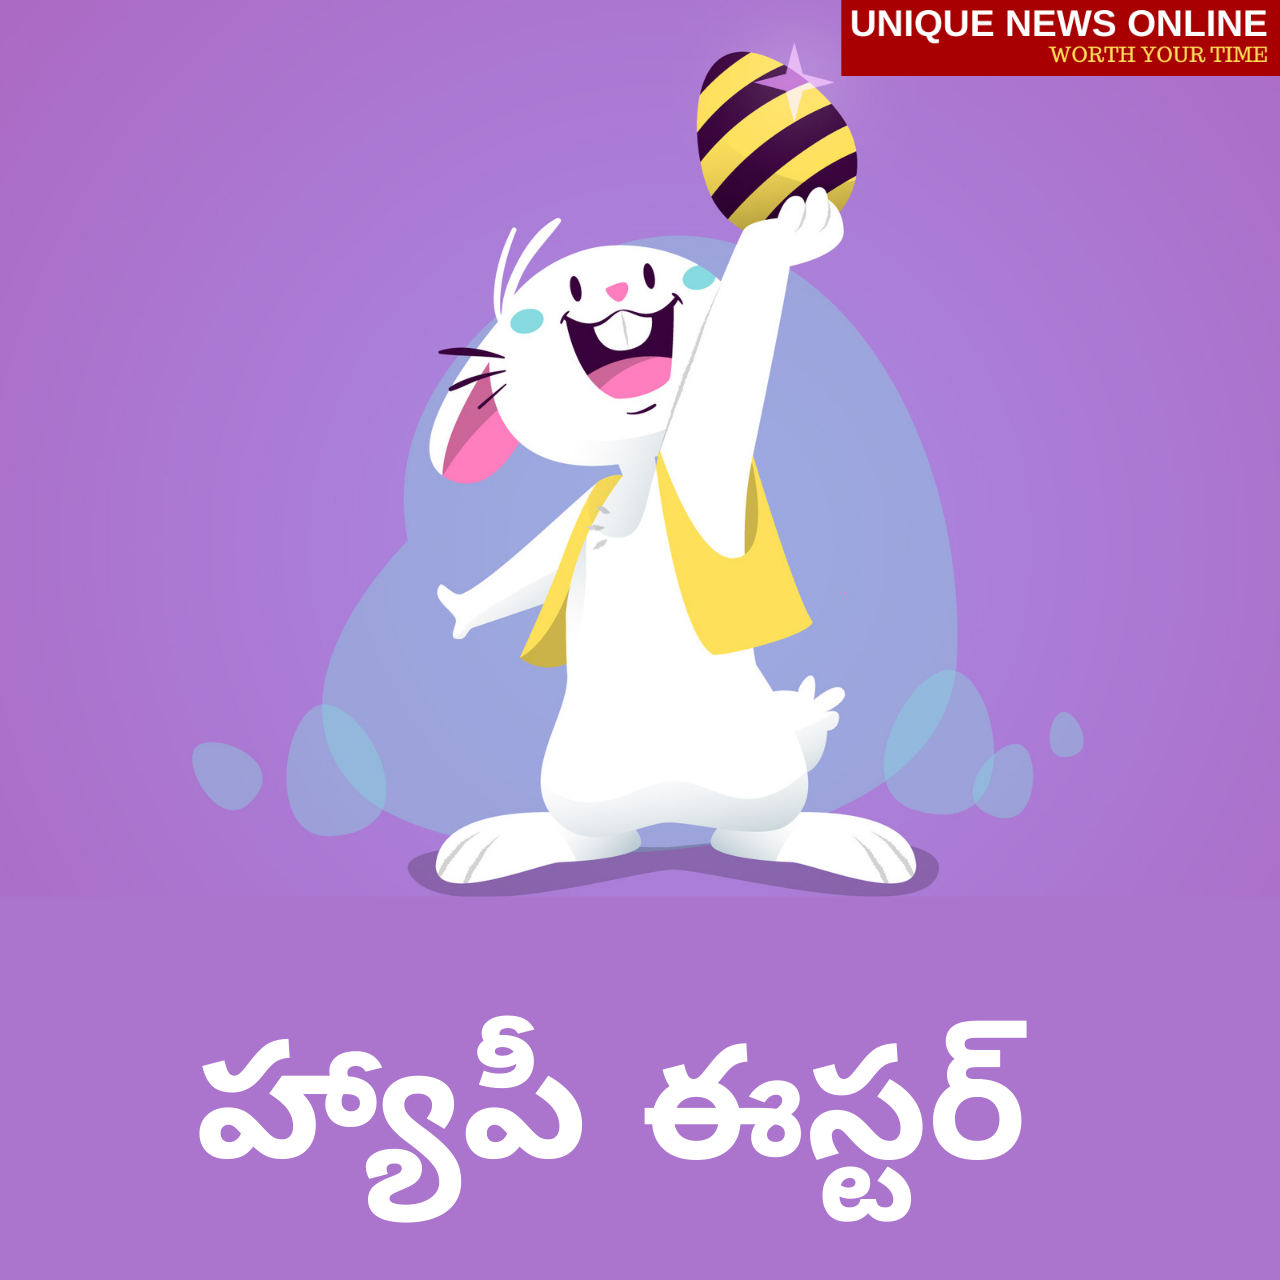 Happy Easter 2021 Wishes in Telugu, Messages, Greetings, Quotes, and Images to share on Easter Sunday